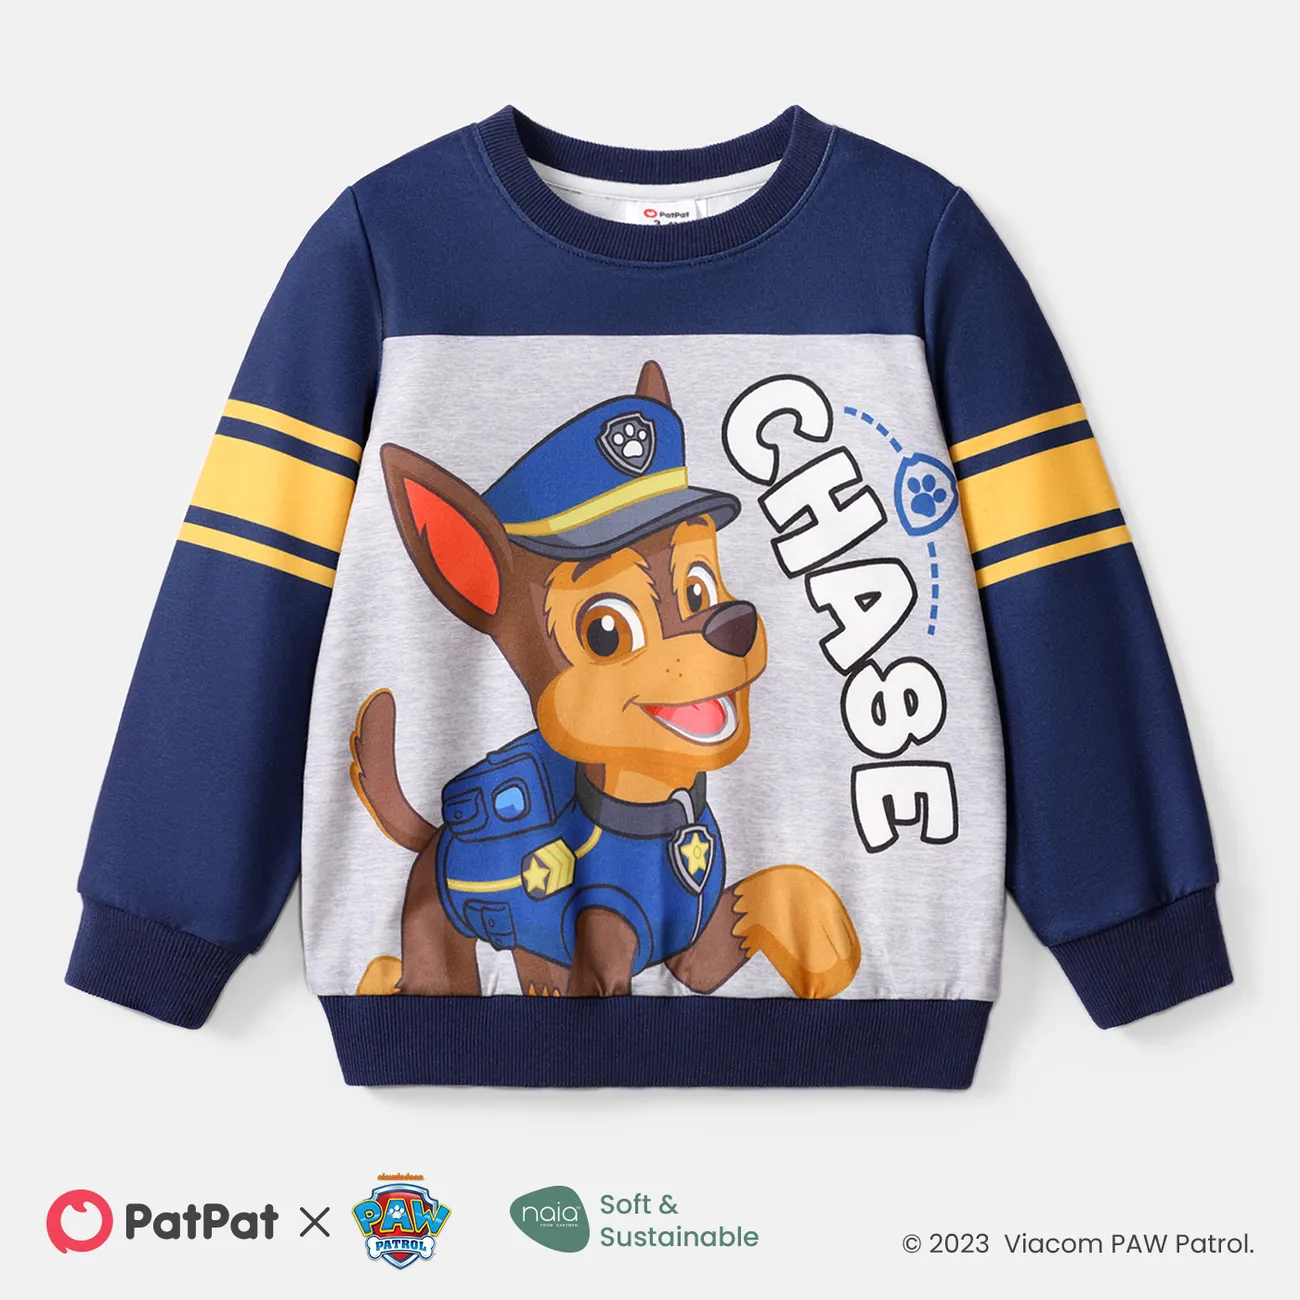 Pullover US PatPat Girl/Boy $9.74 Naia™ Toddler PAW Only Print Mobile Patrol Character Sweatshirt